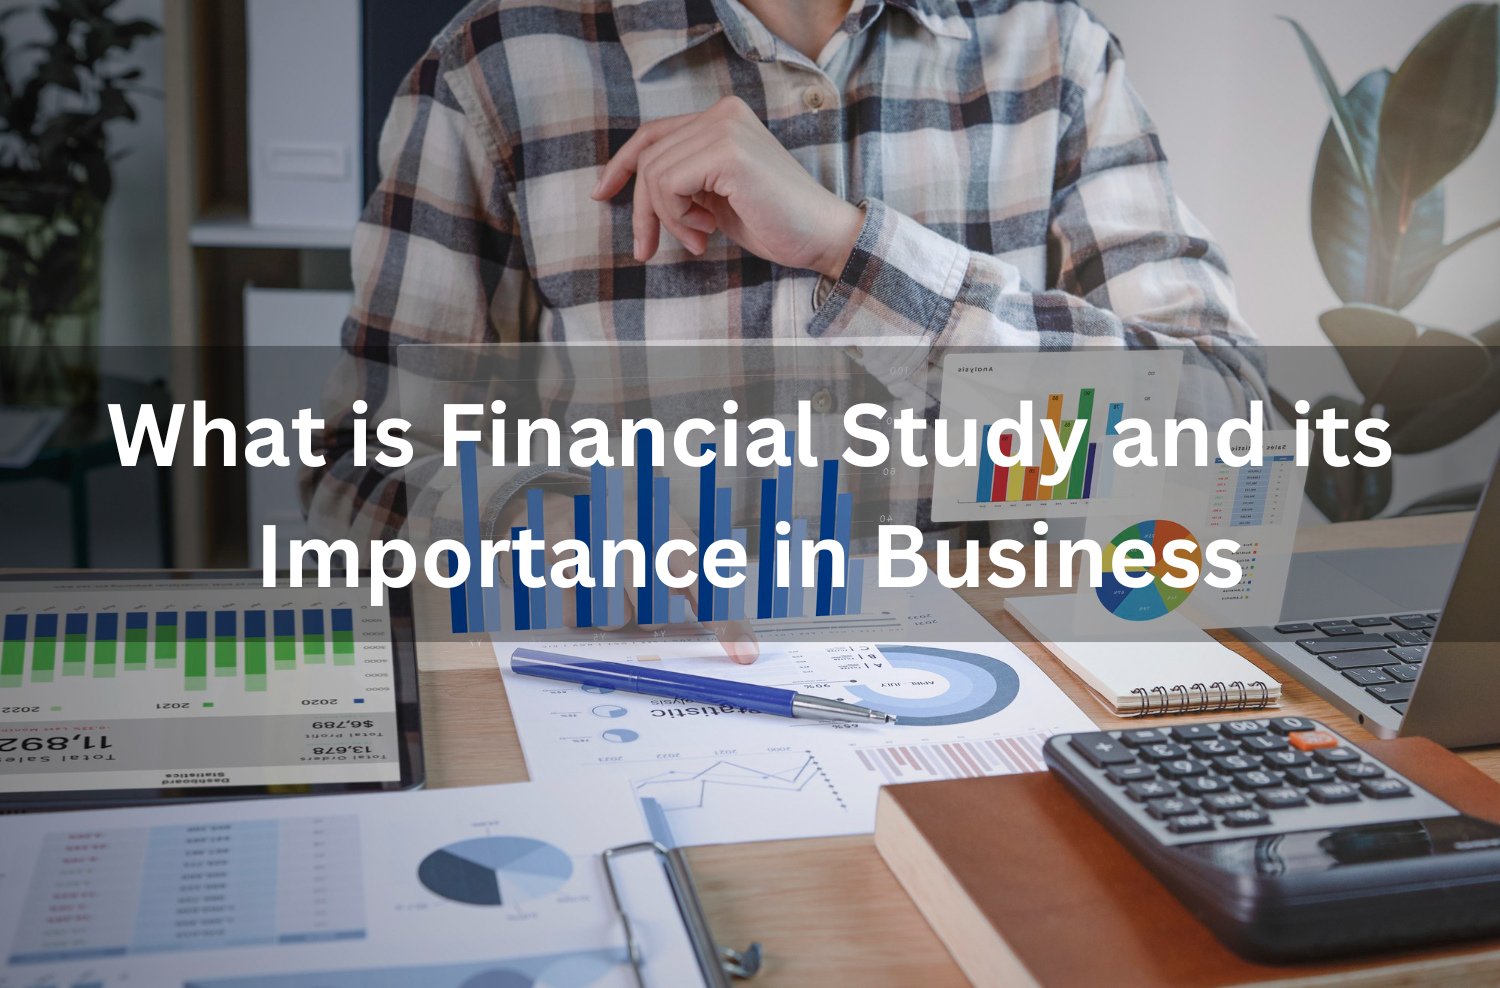 Everything You Need to Know About Financial Study and its Importance in Business